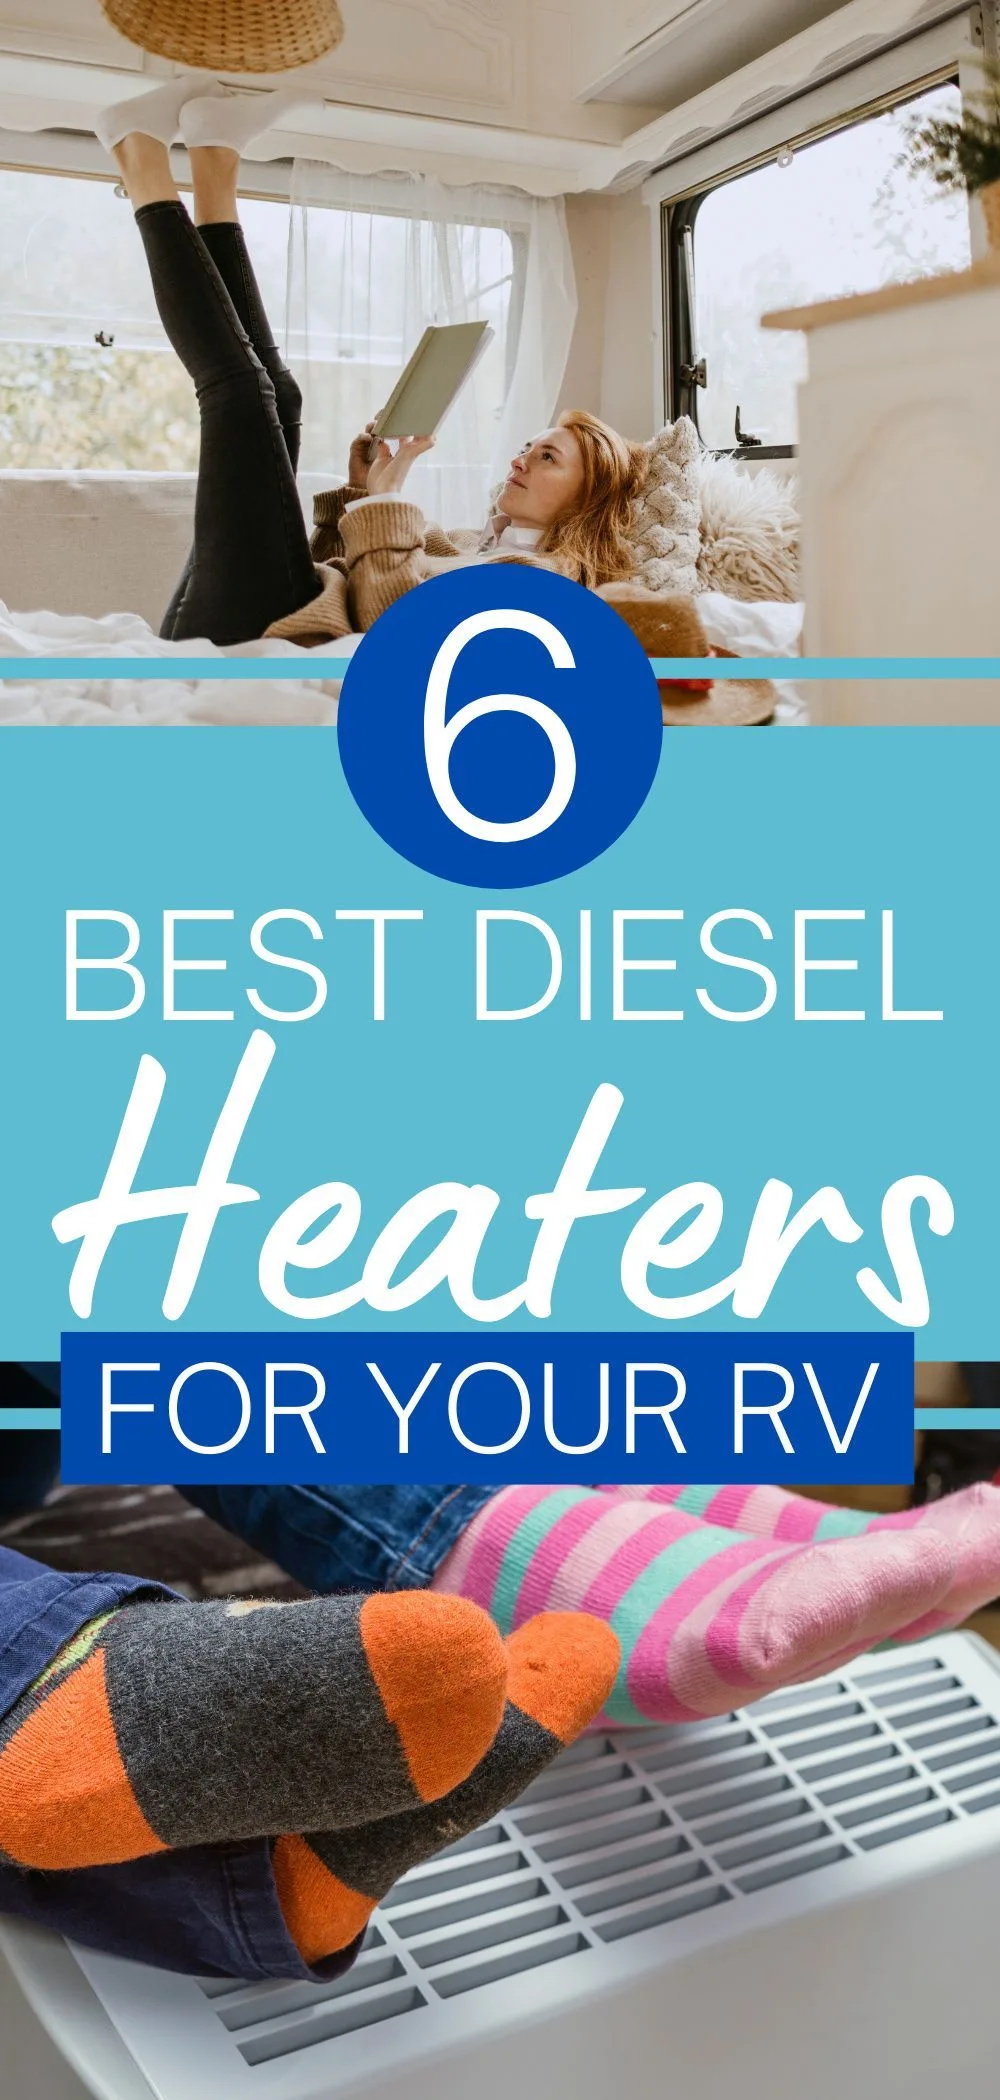 The Best Diesel Heaters for Campervans & RVs _ A Buyer's Guide on Pinterest